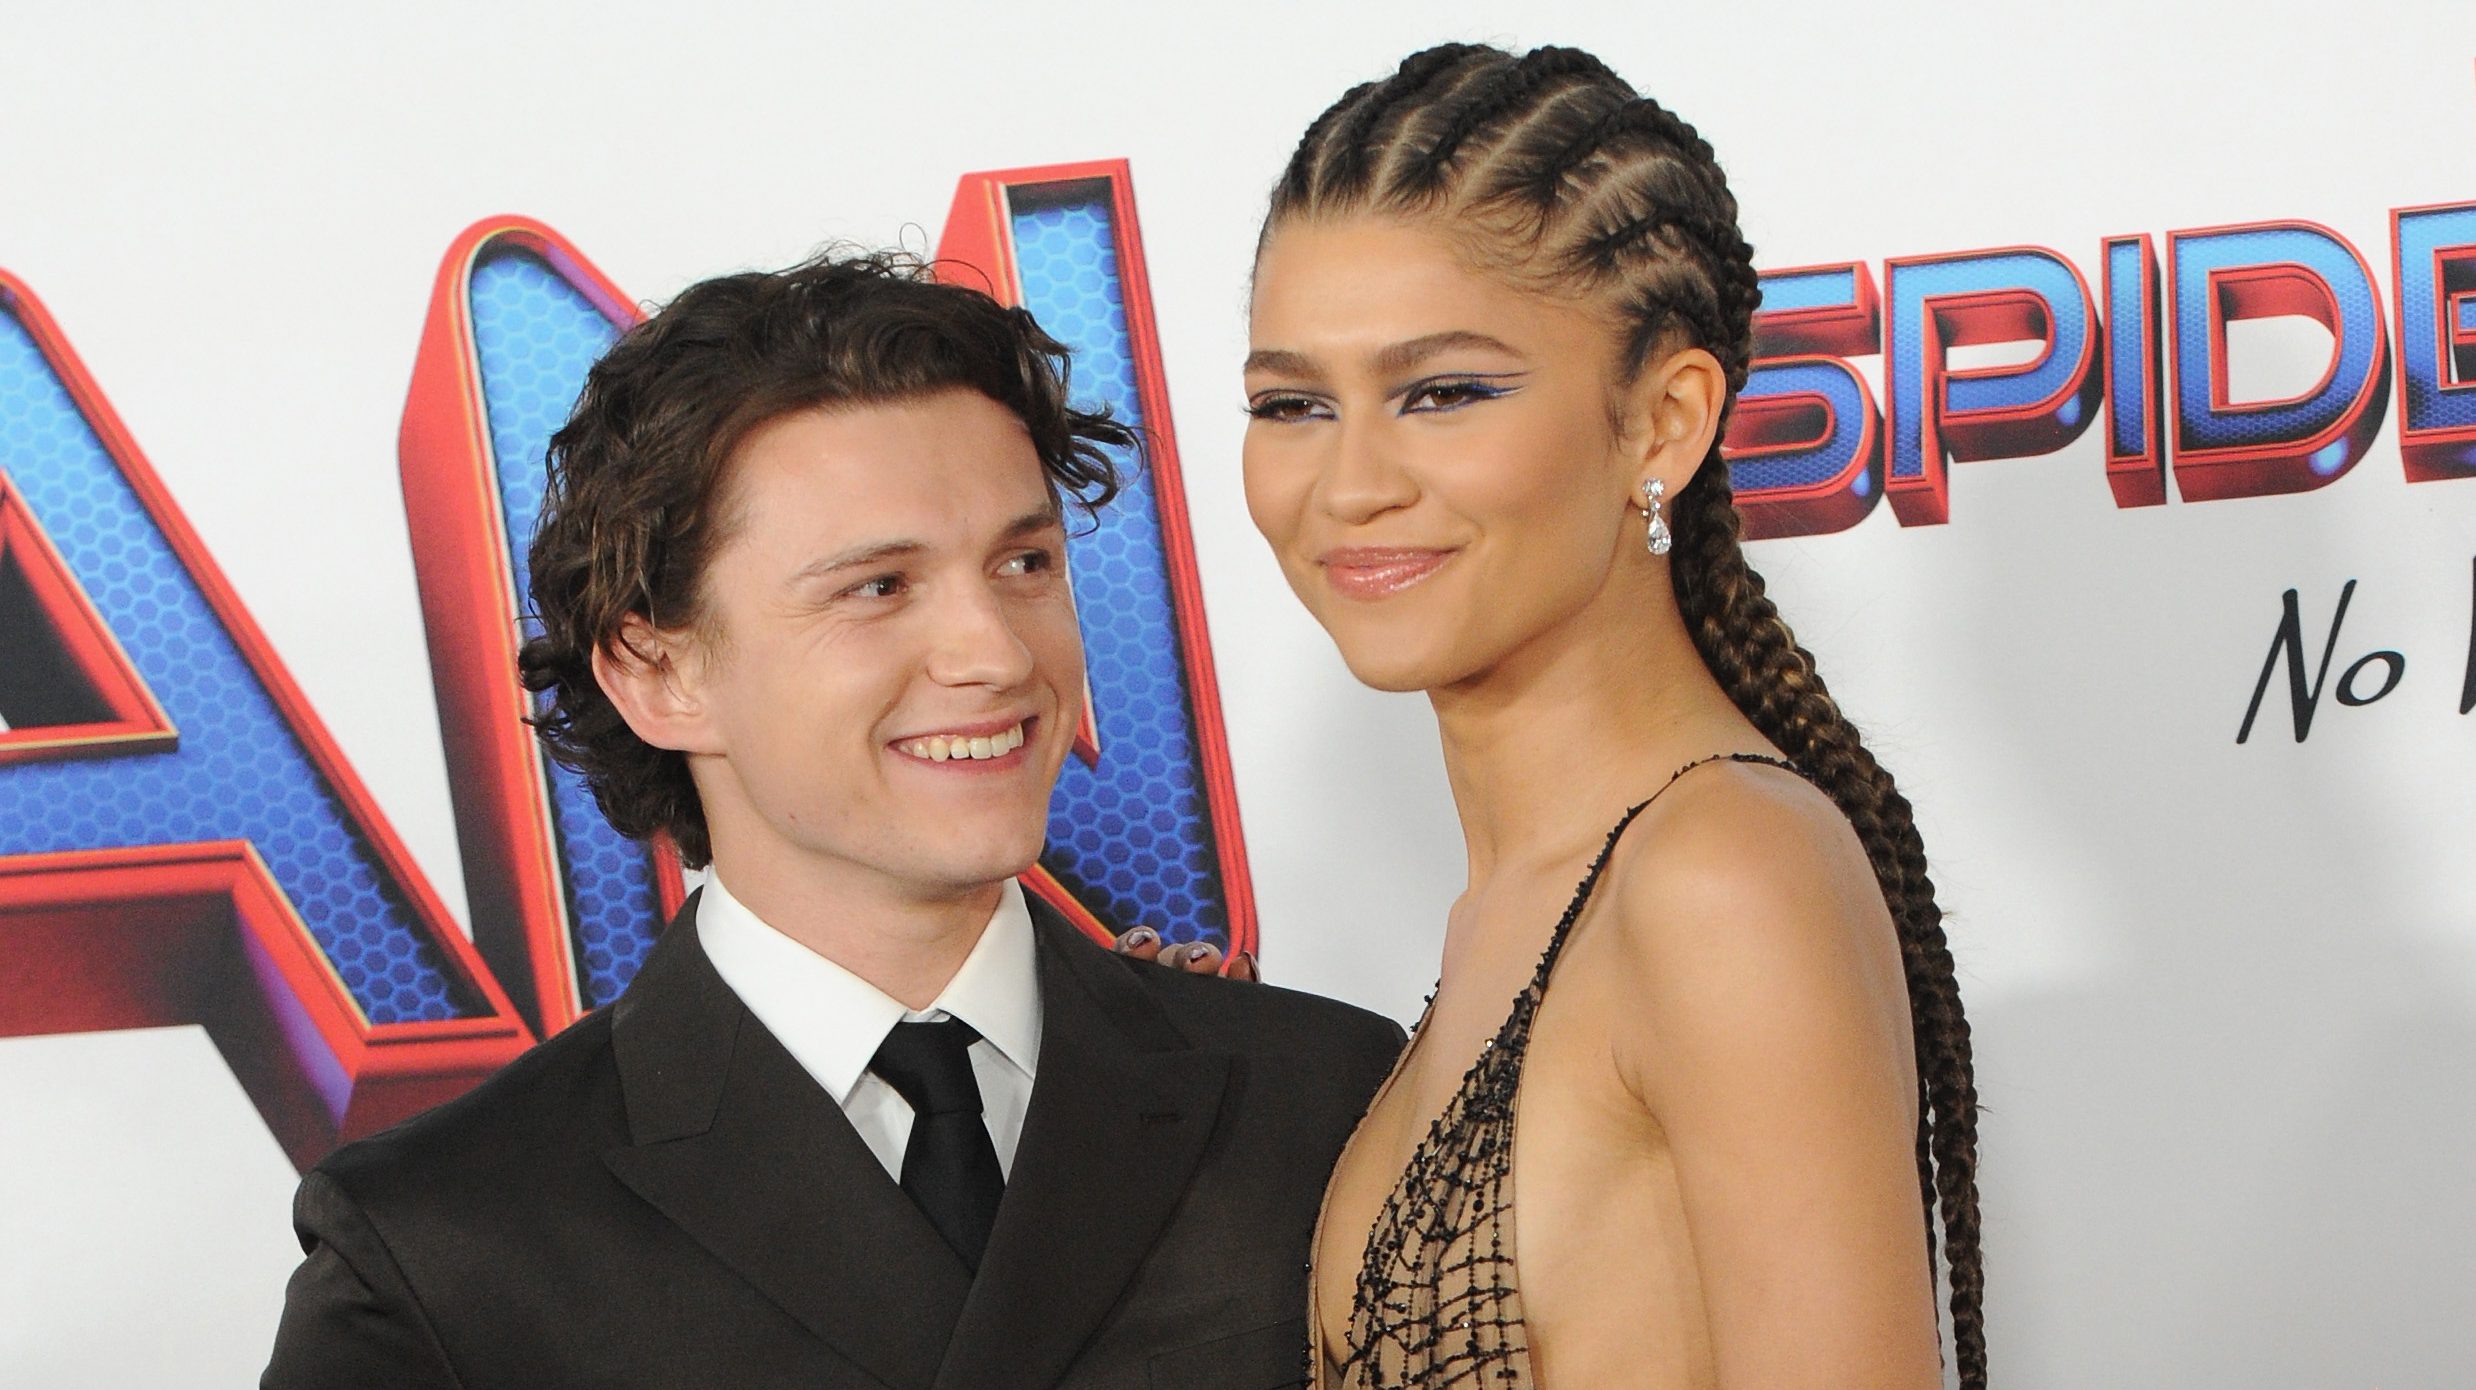 Tom and Zendaya posing for pictures.  She is wearing a nude dress with details in black and he is wearing a black suit and white shirt.